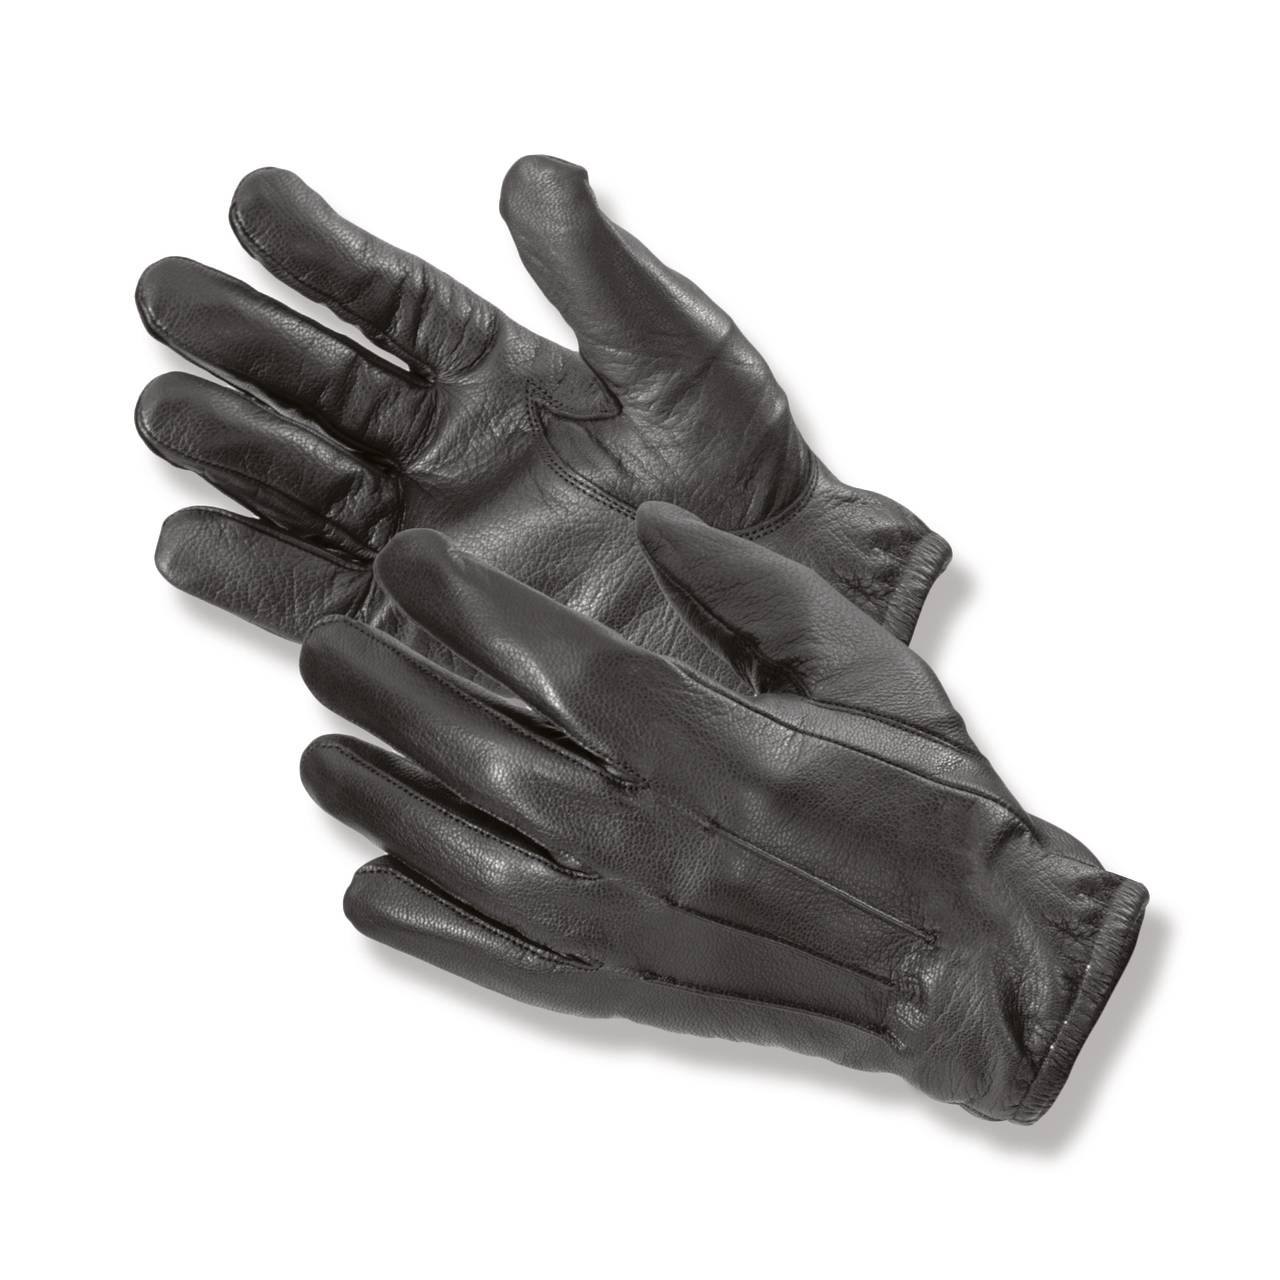 Worldwide Protective Products Protector Leather/Kevlar Glove